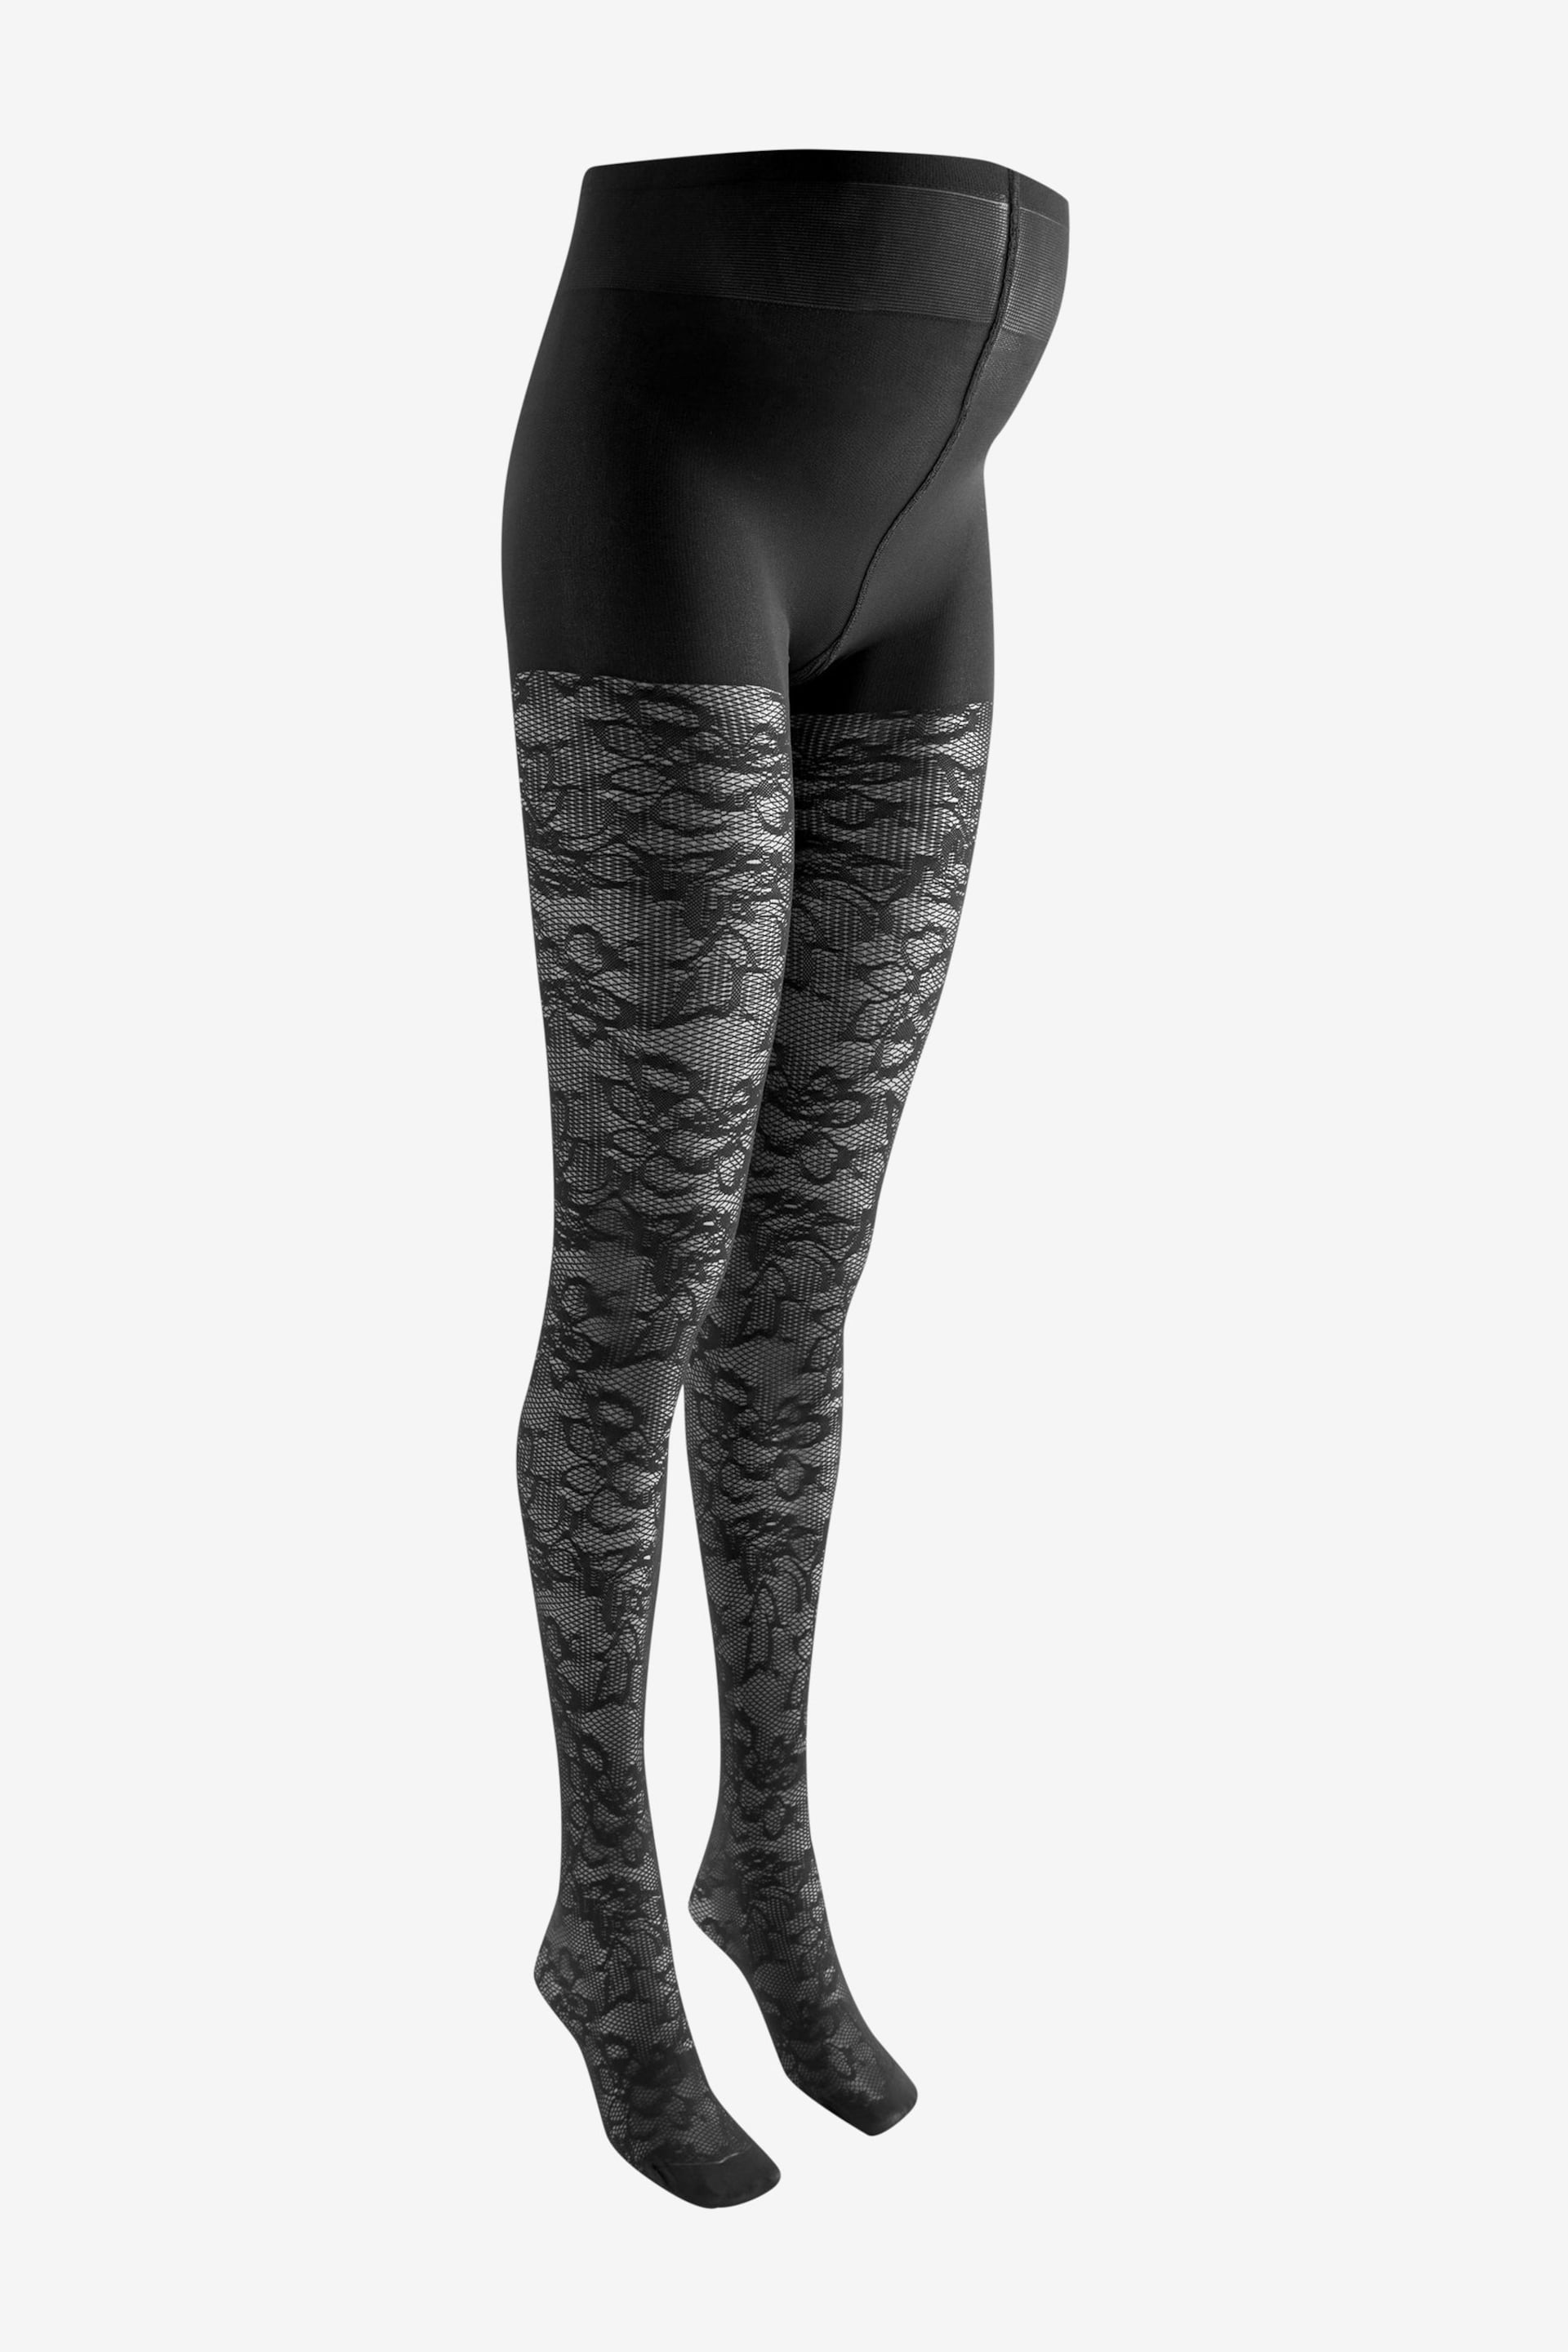 Black Lace Maternity Pattern Tights - Image 4 of 6